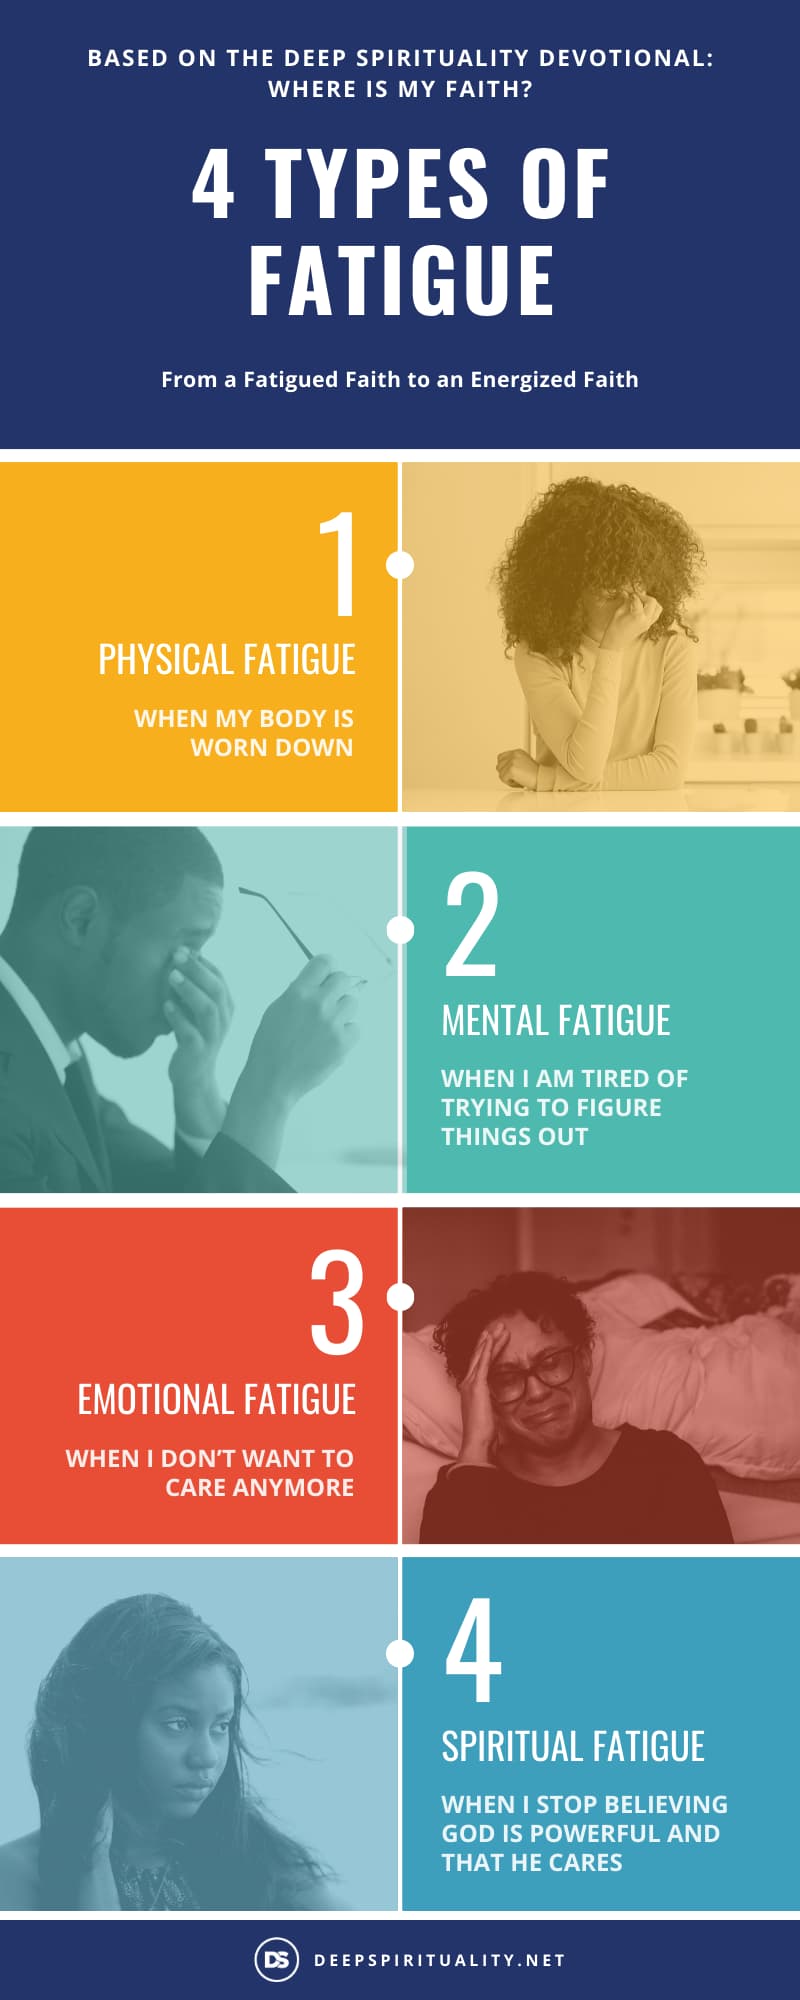 4 Types of Fatigue - use this chart to help you identify where your faith is currently at, and how to have faith in God.